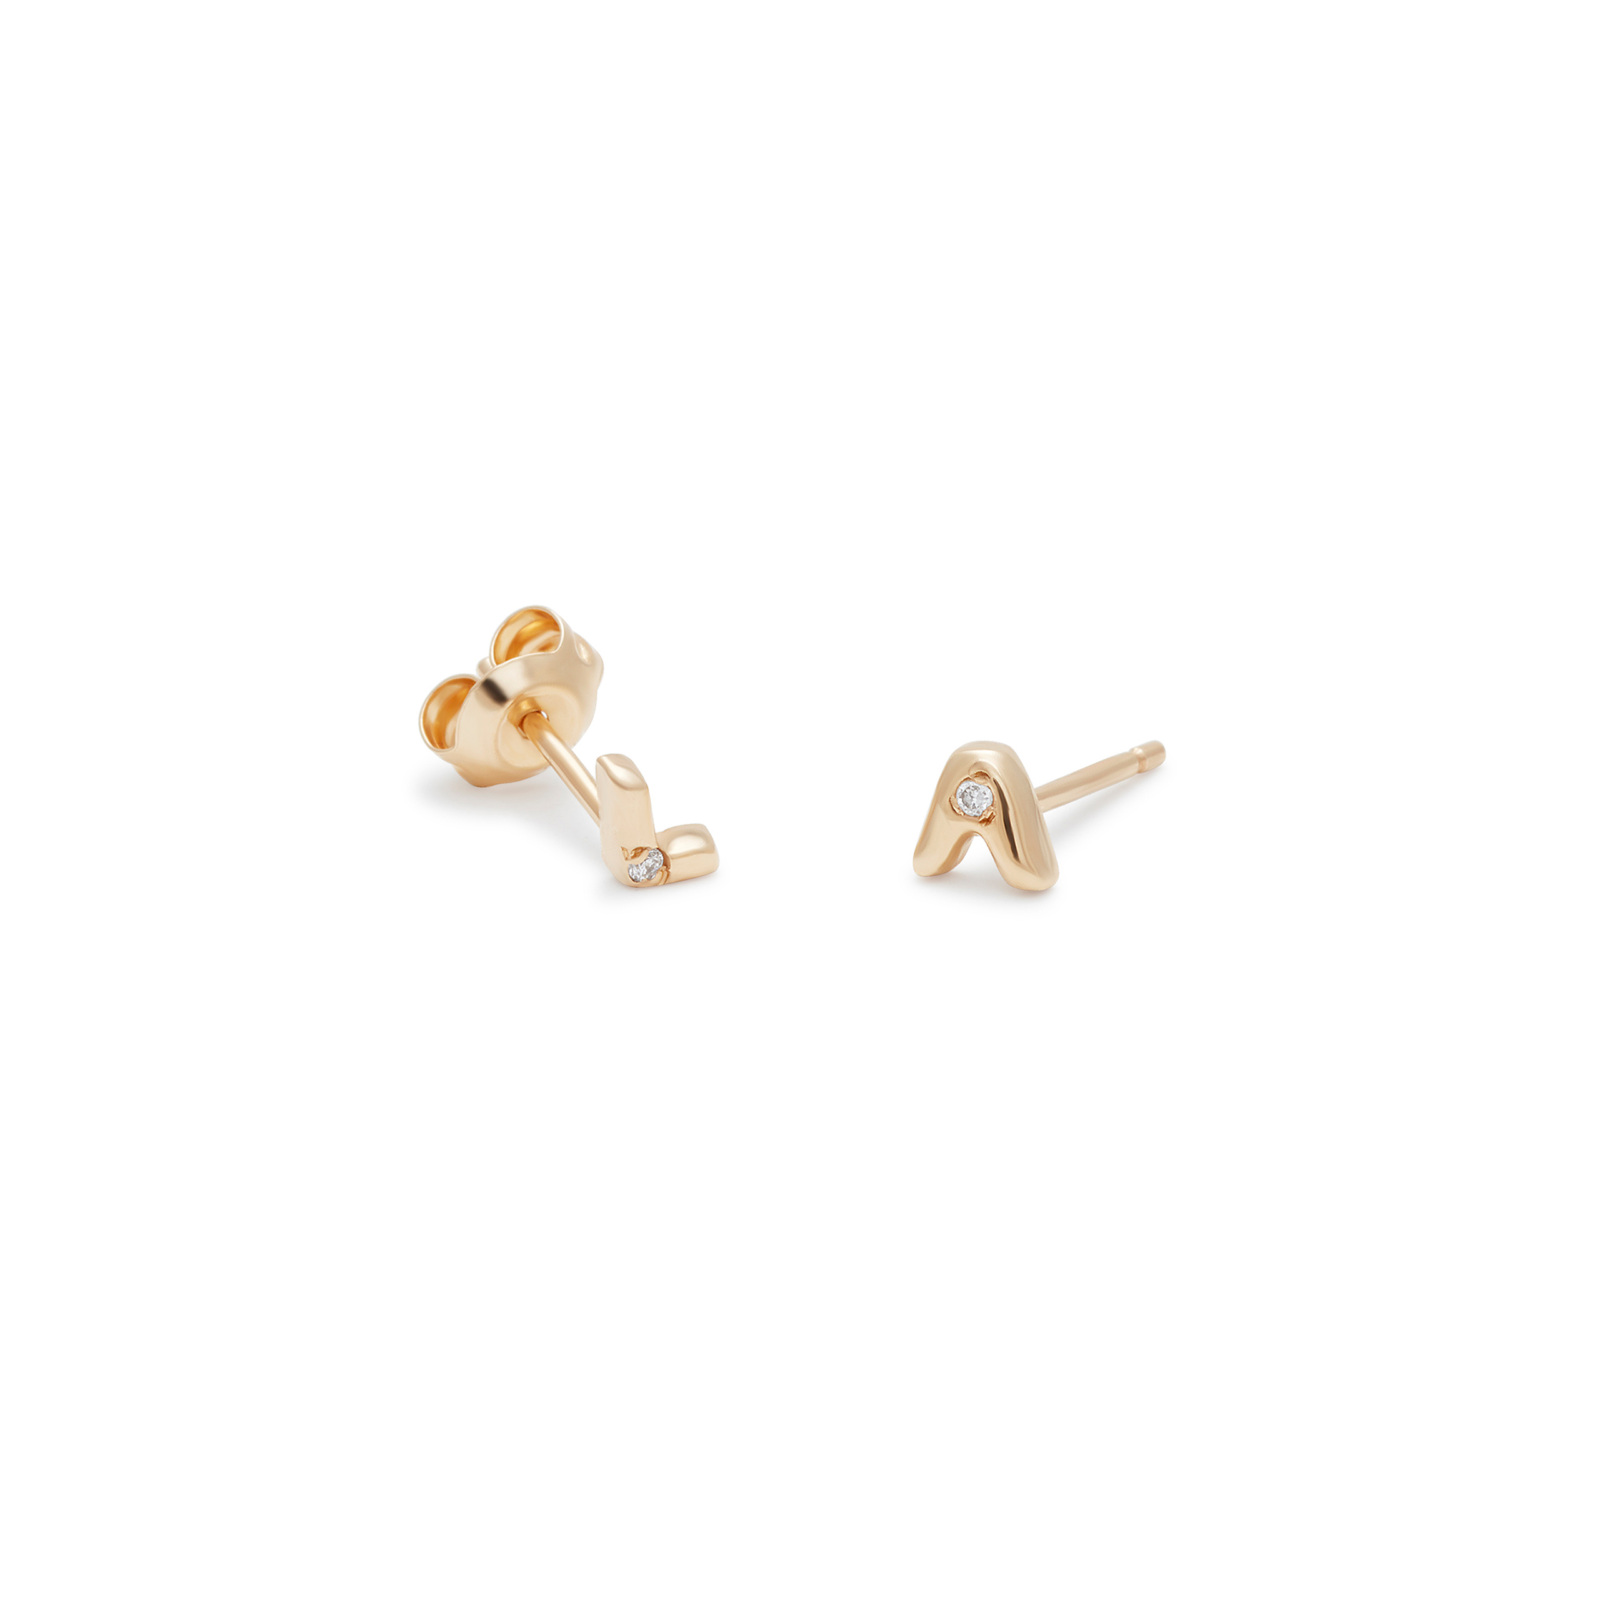 Letter Stud Earrings in 14k Yellow Gold with White Diamonds